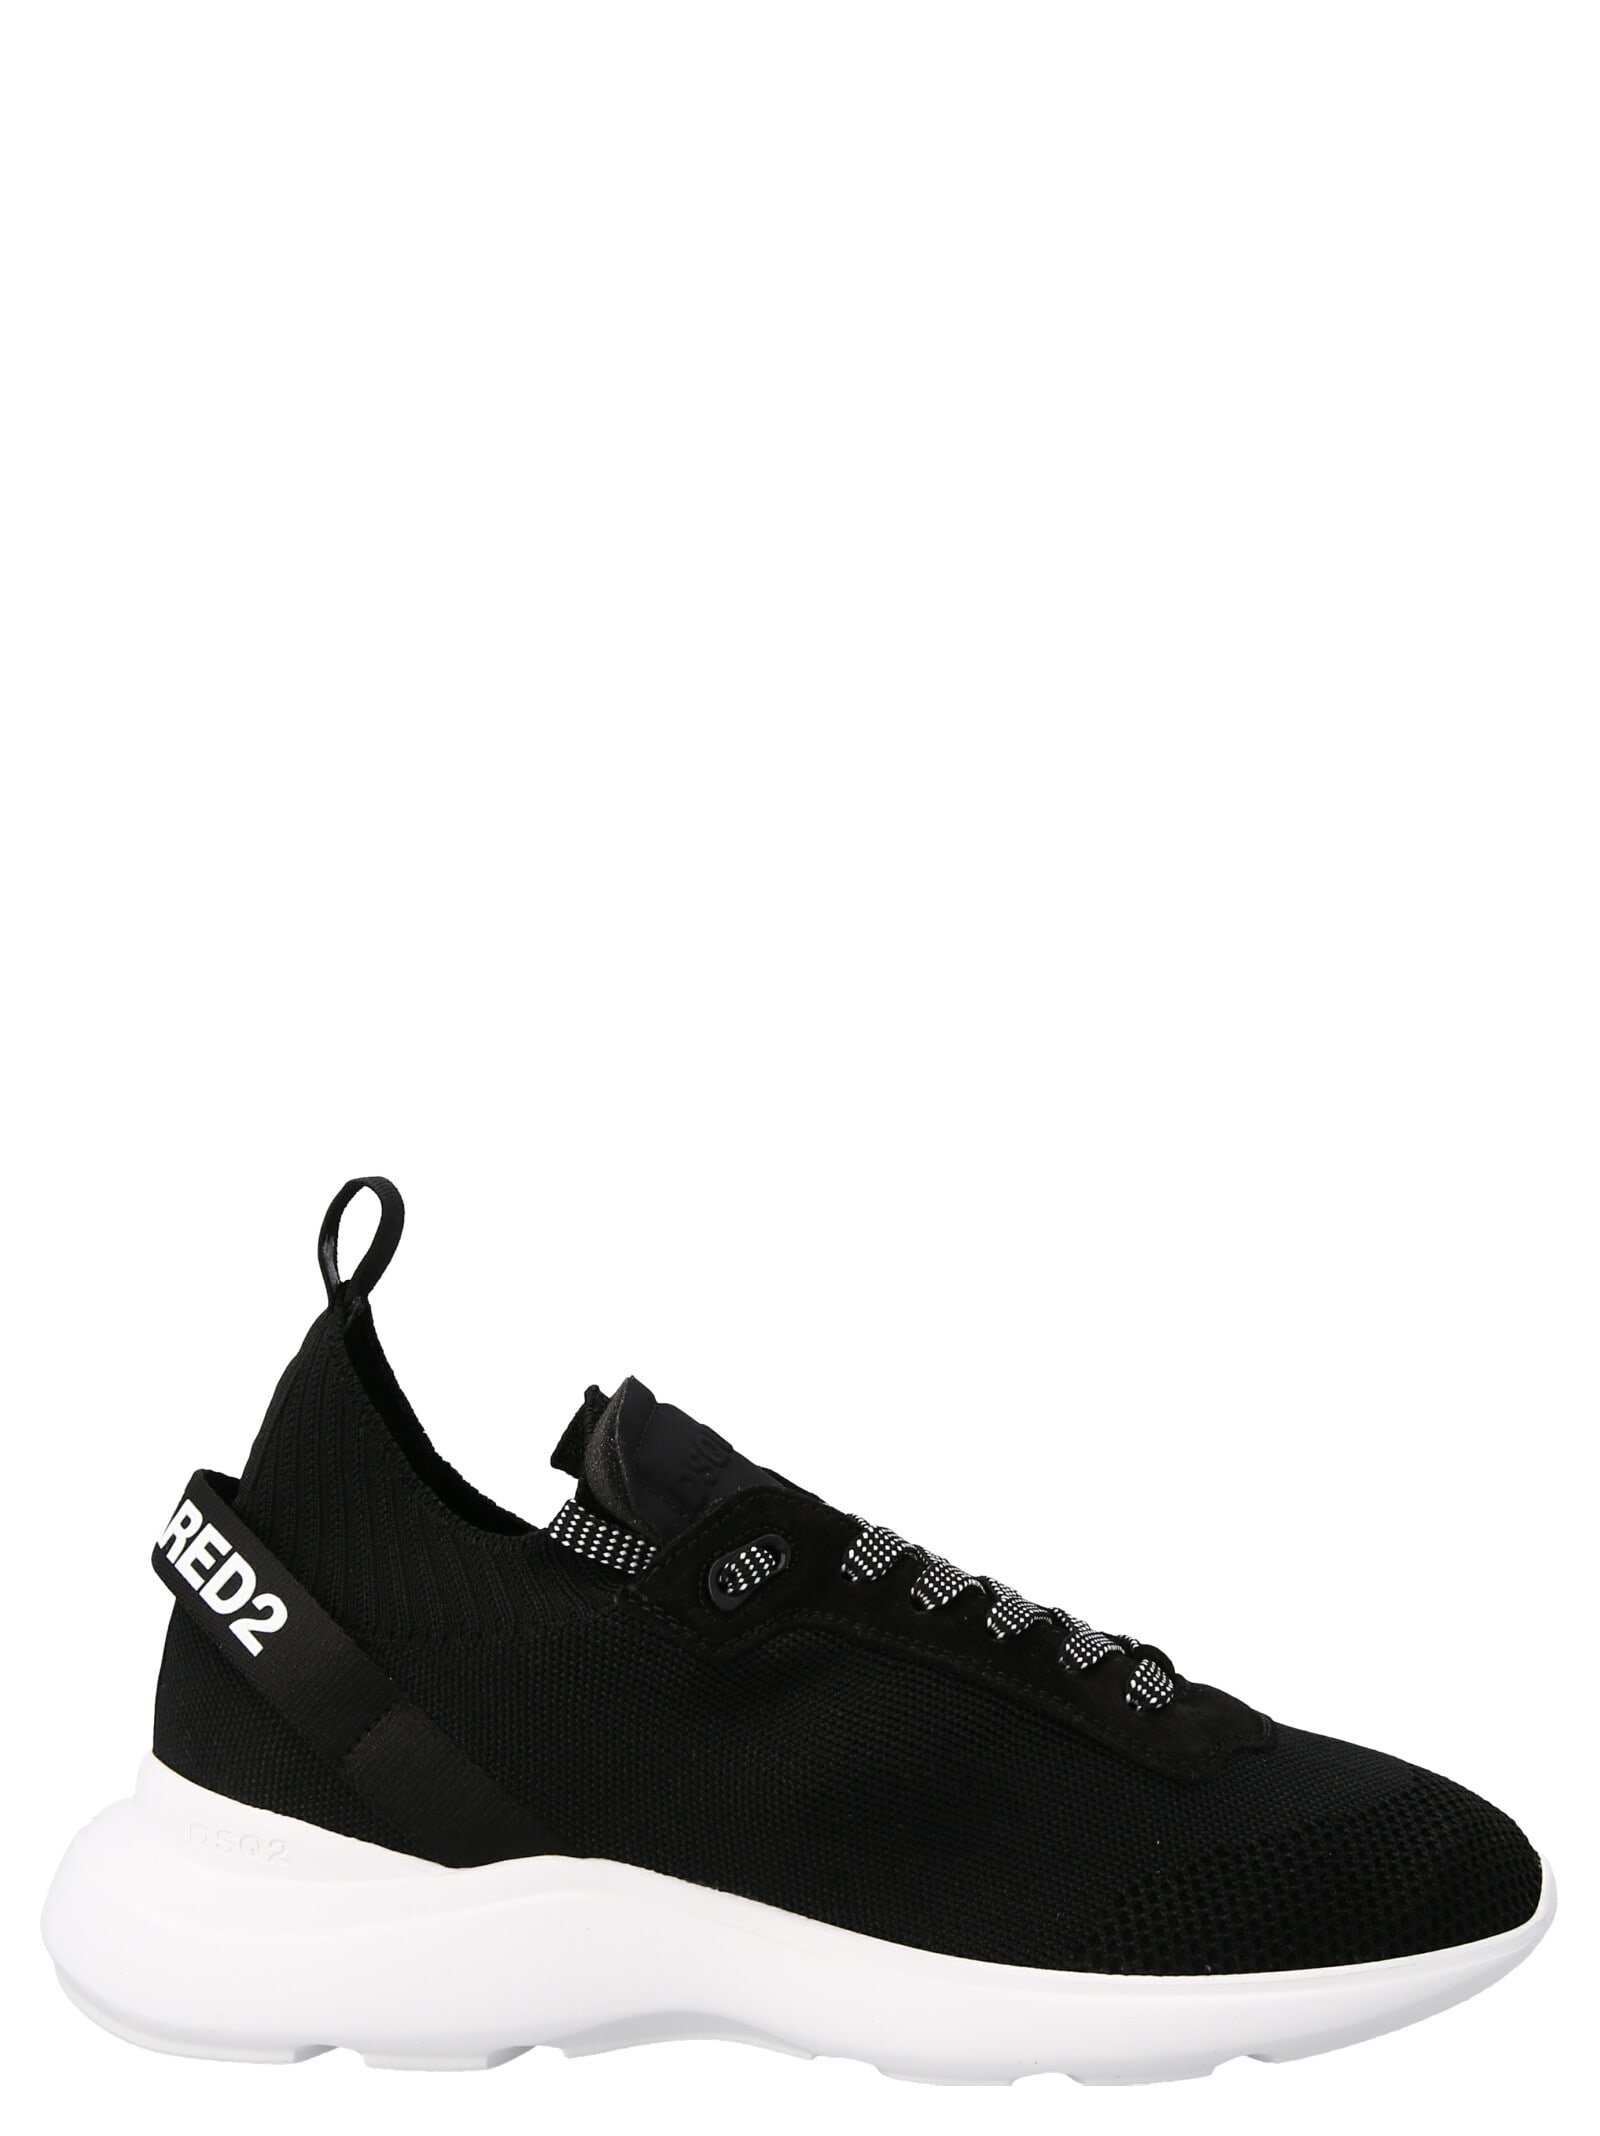 DSQUARED2 FLY SNEAKERS